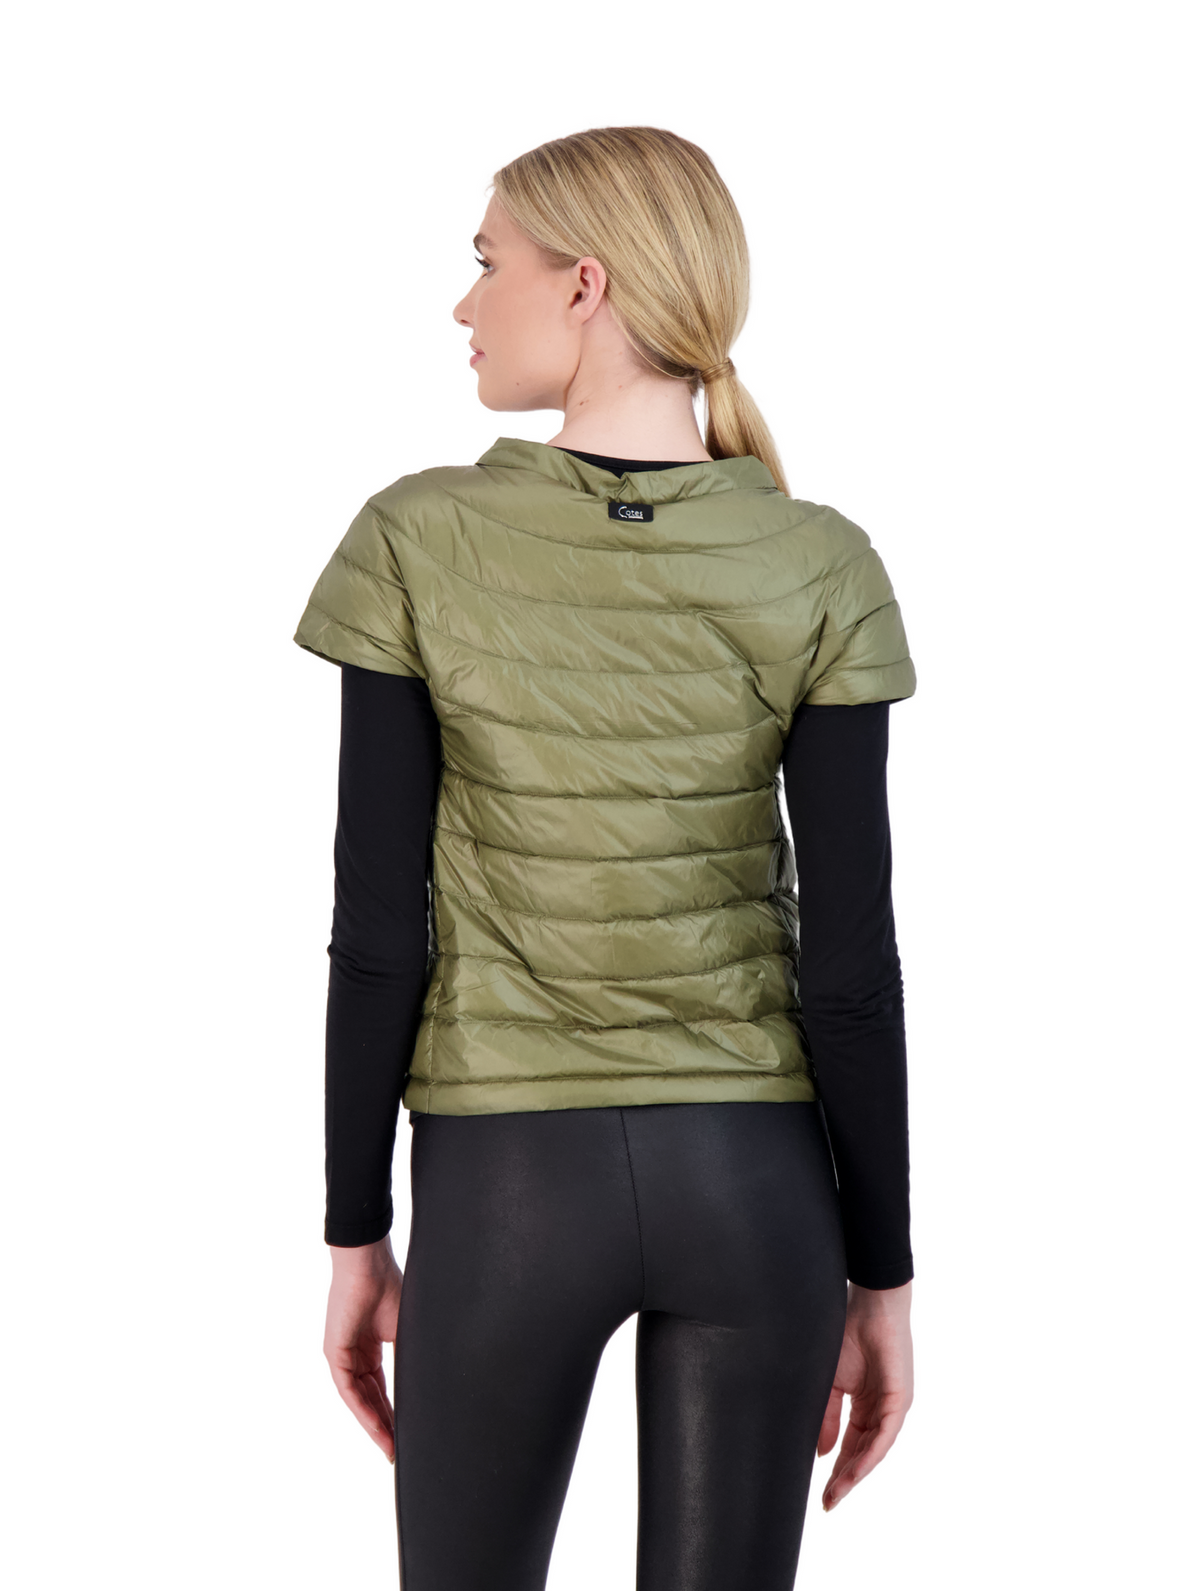 St. Ives Short Sleeve Down Puffer Jacket in Olive